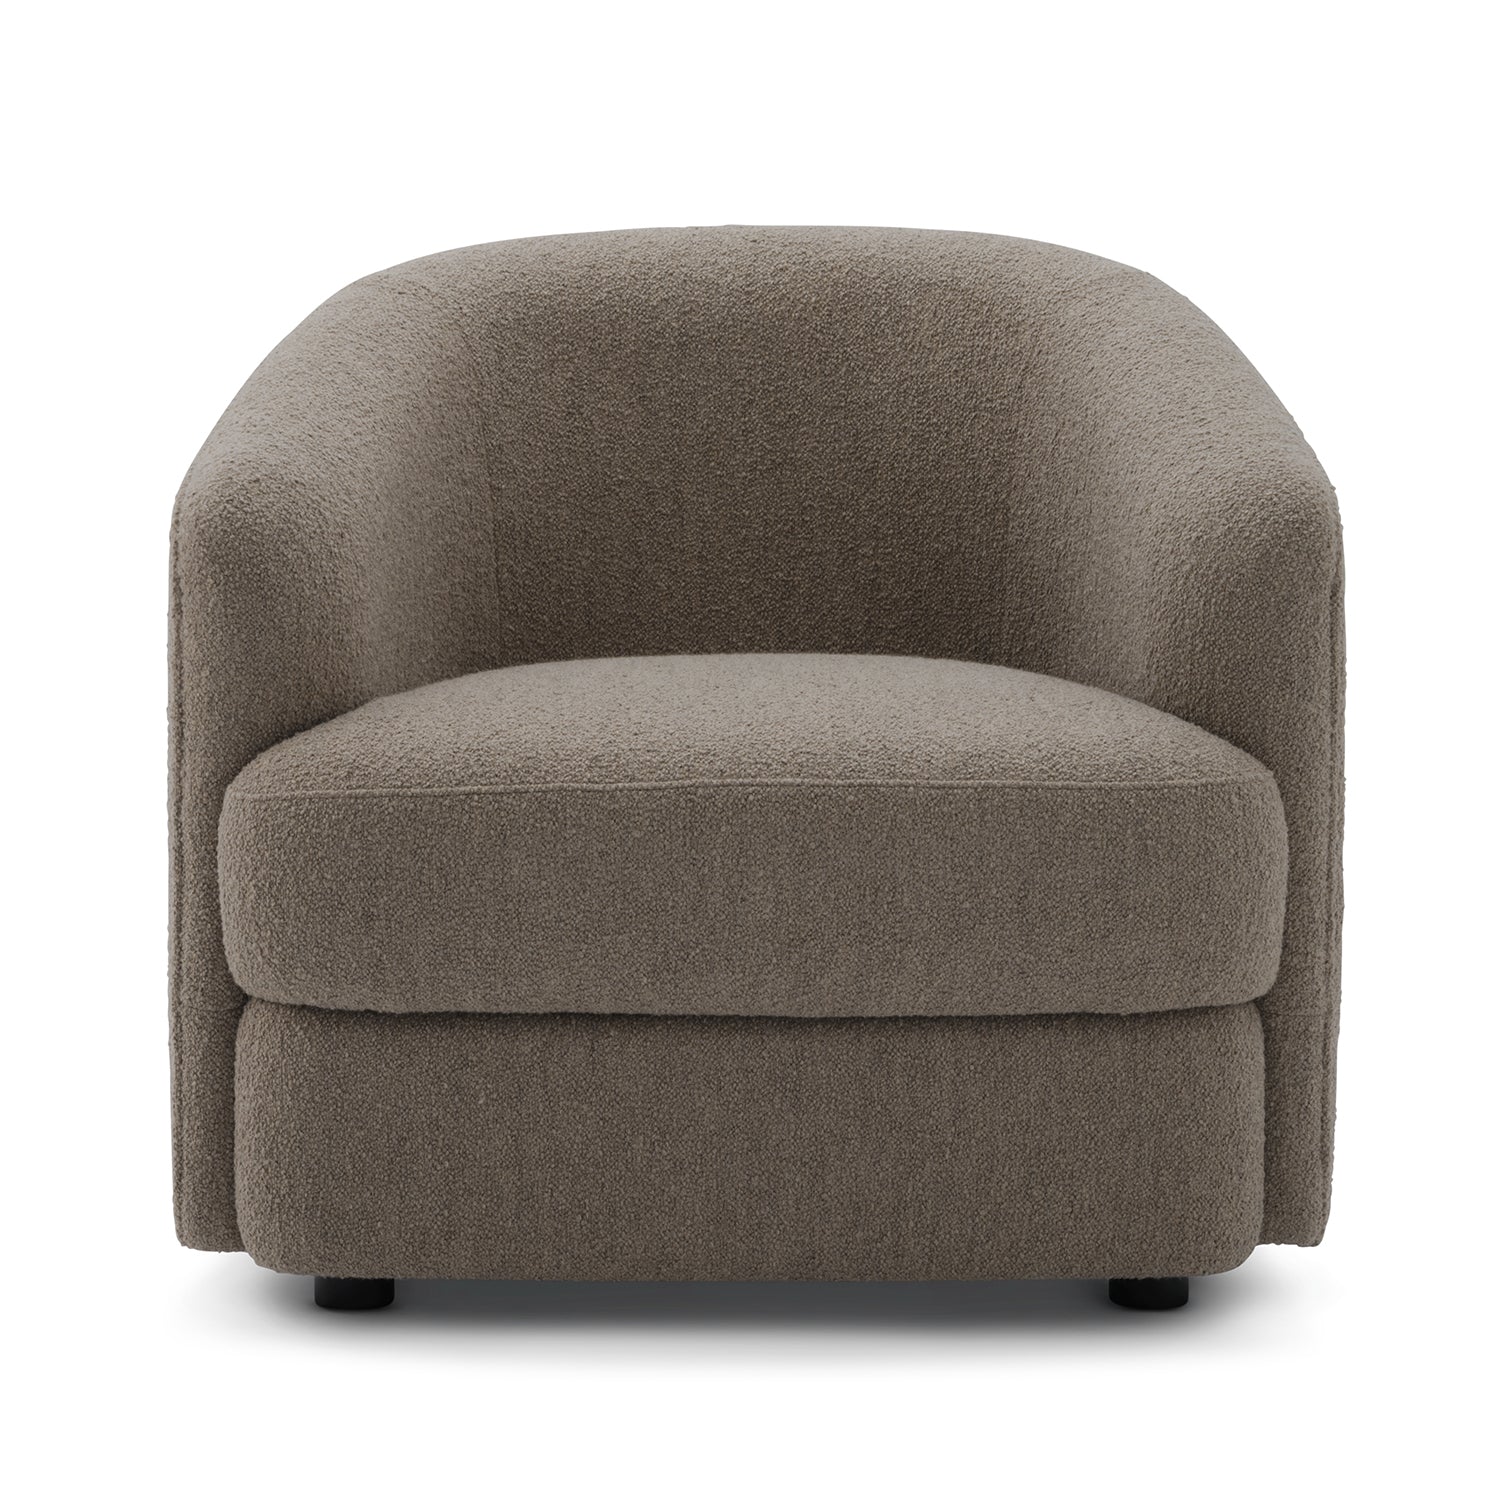 New Works Covent Lounge Chair in dark taupe